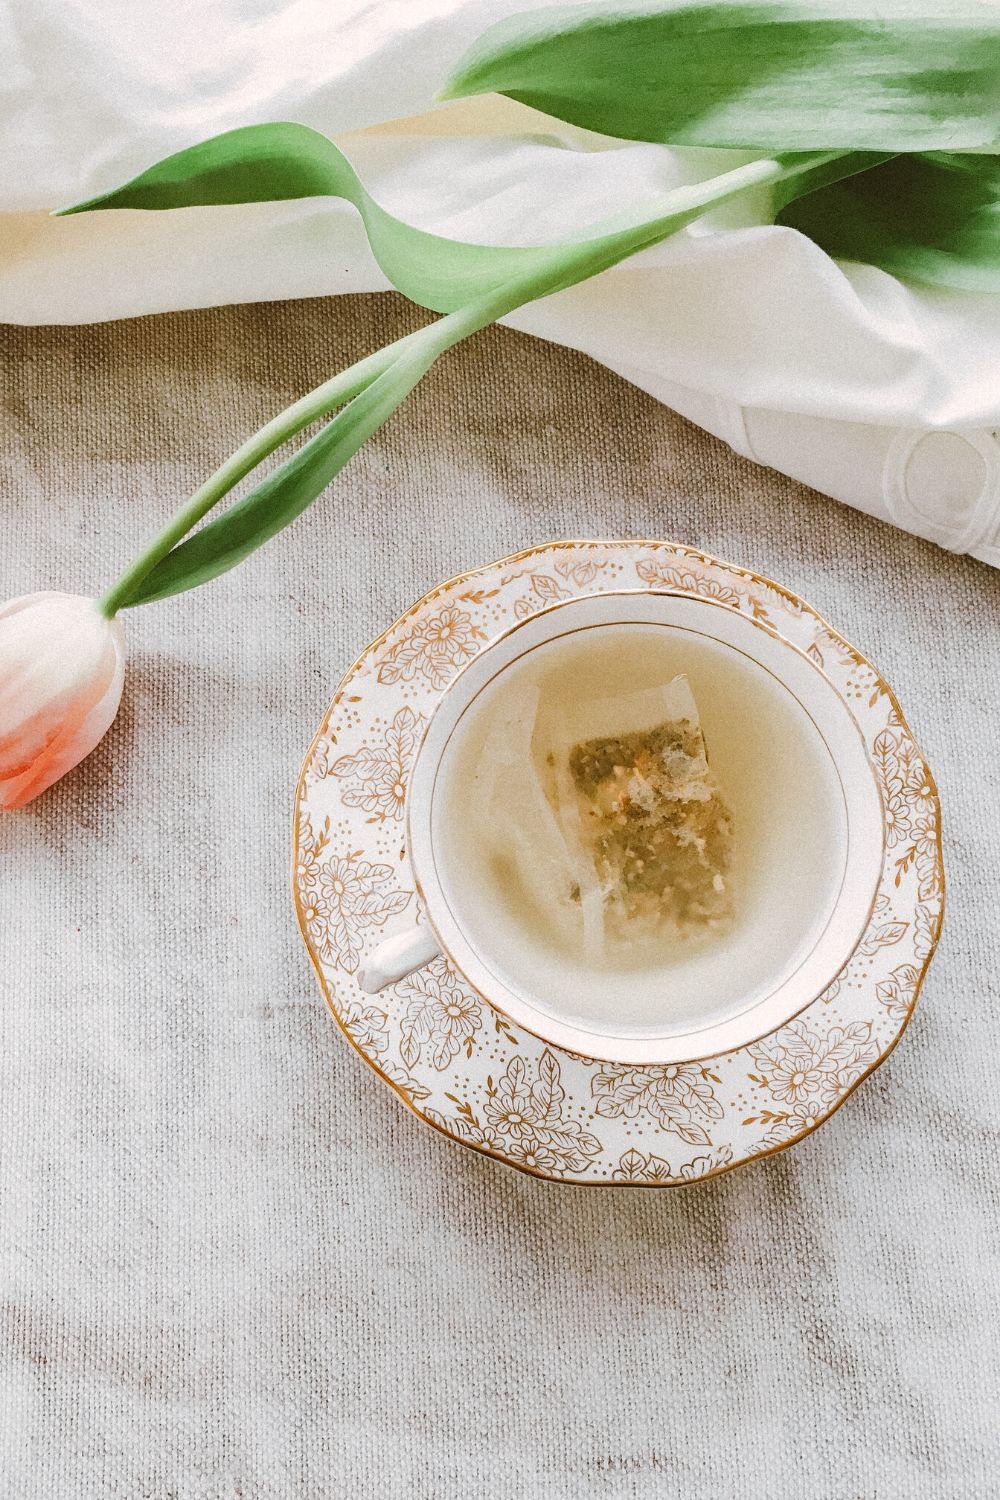 A green tea cold compress may help soothe and lessen the appearance of pimples